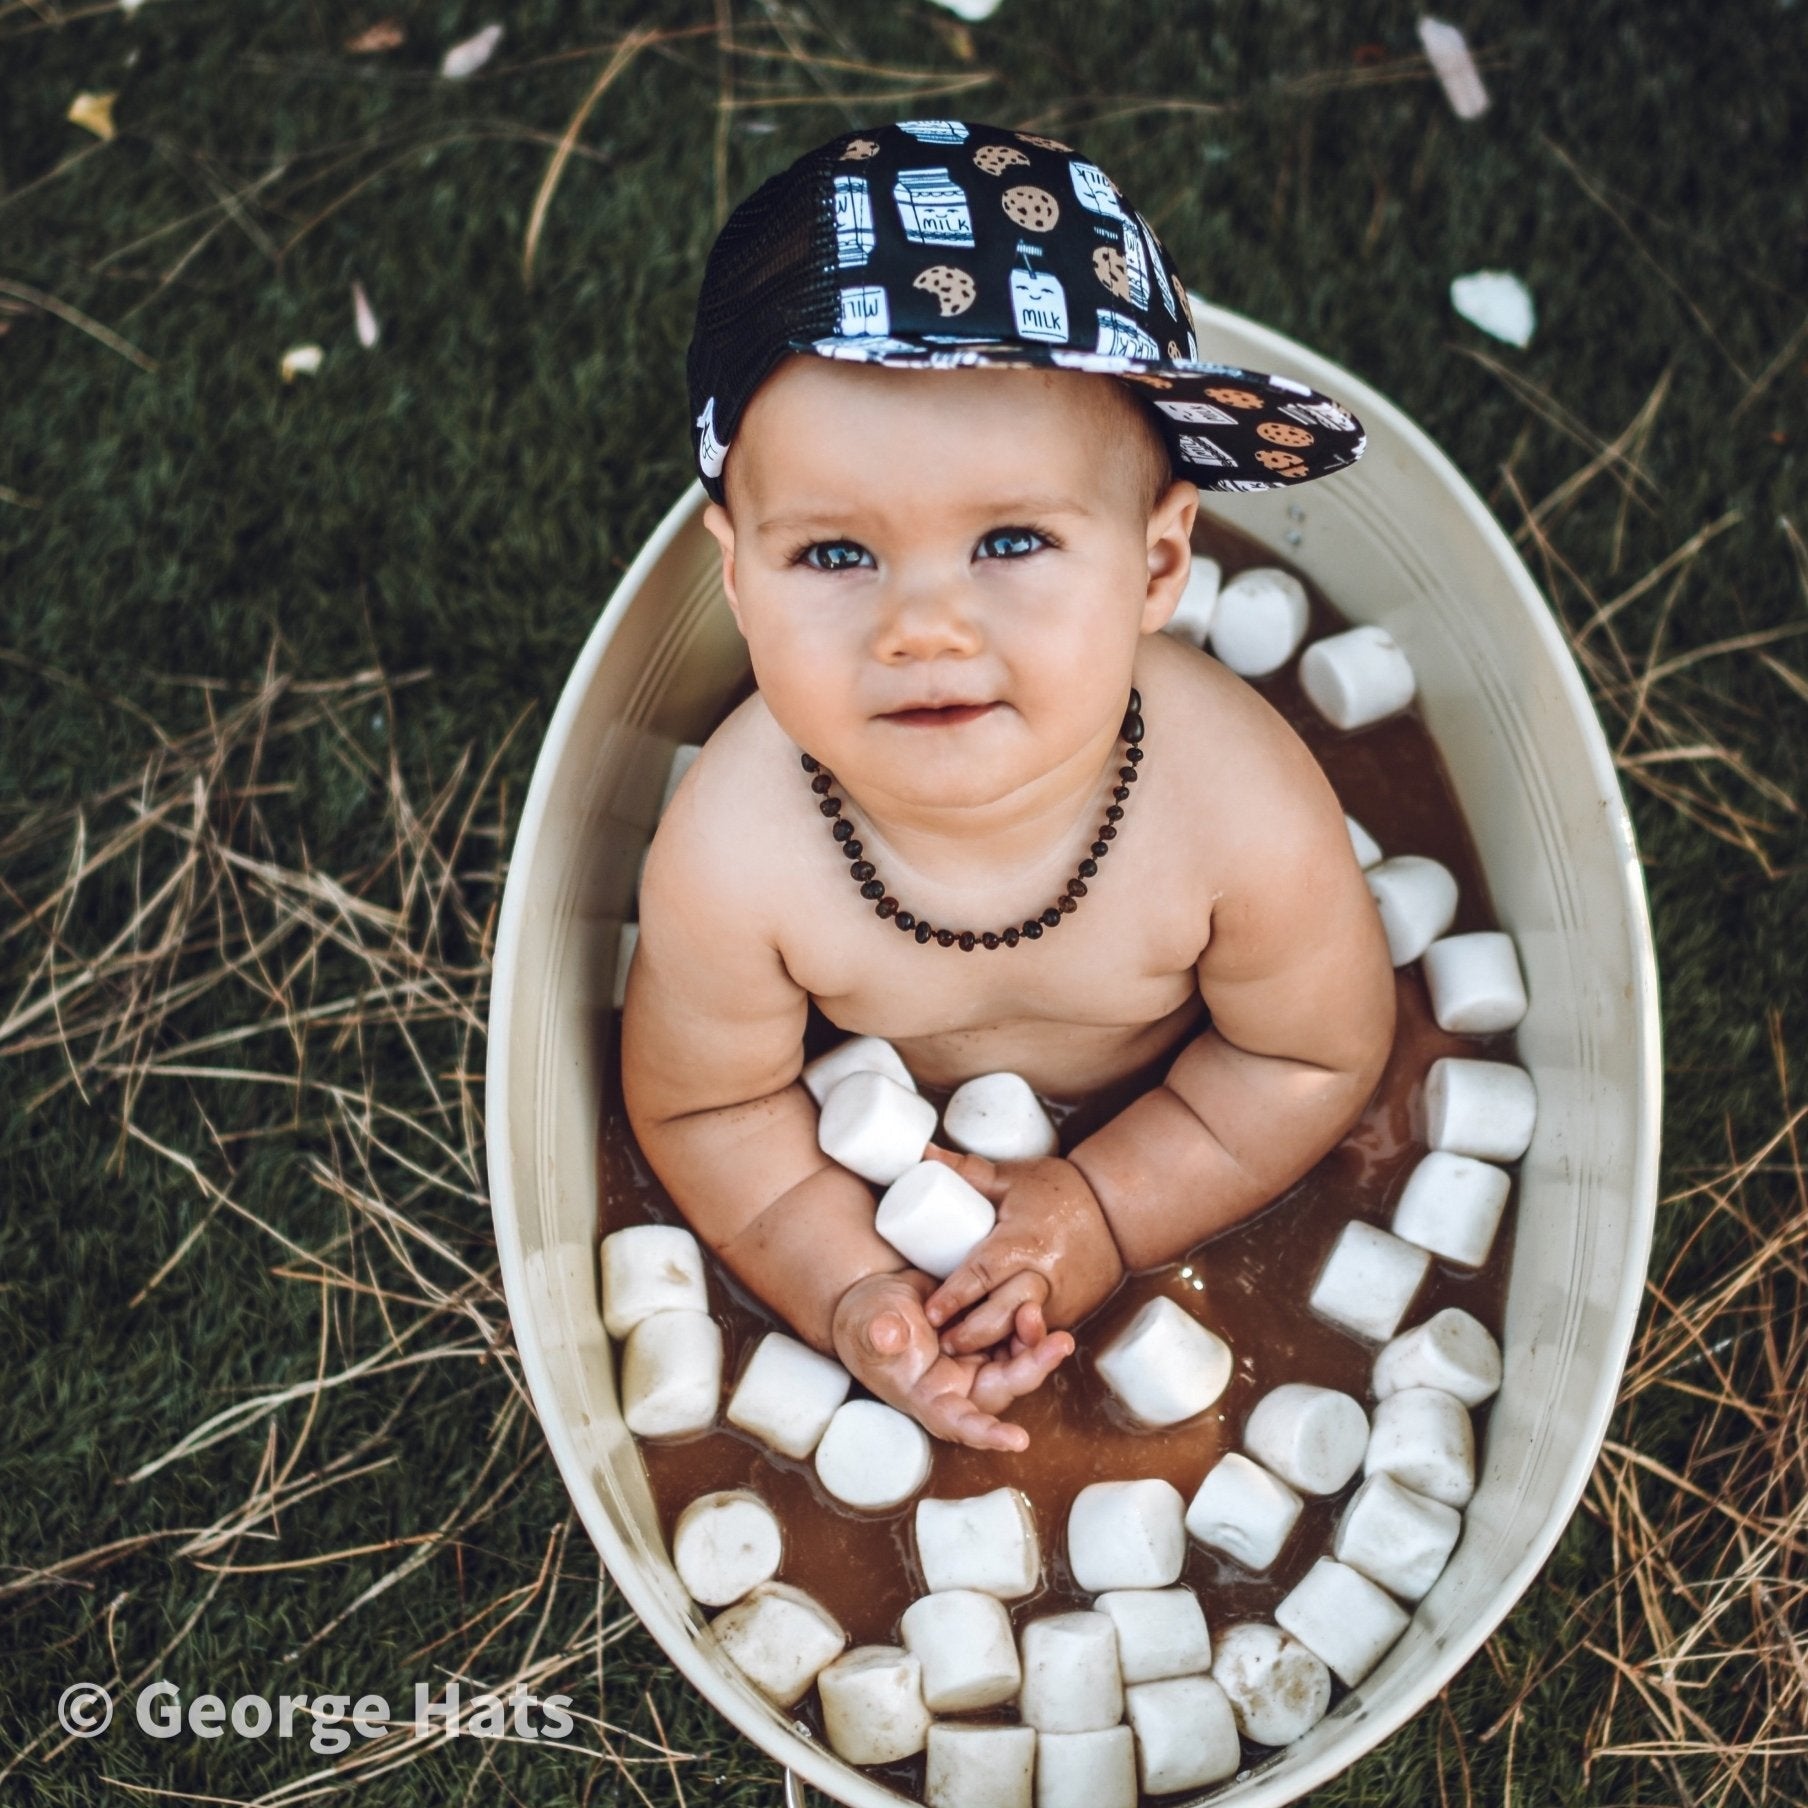 Image of a baby wearing the Milk and Cookies kids trucker hat sitting in a small metal pool filled with hot chocolate and marshmallows 